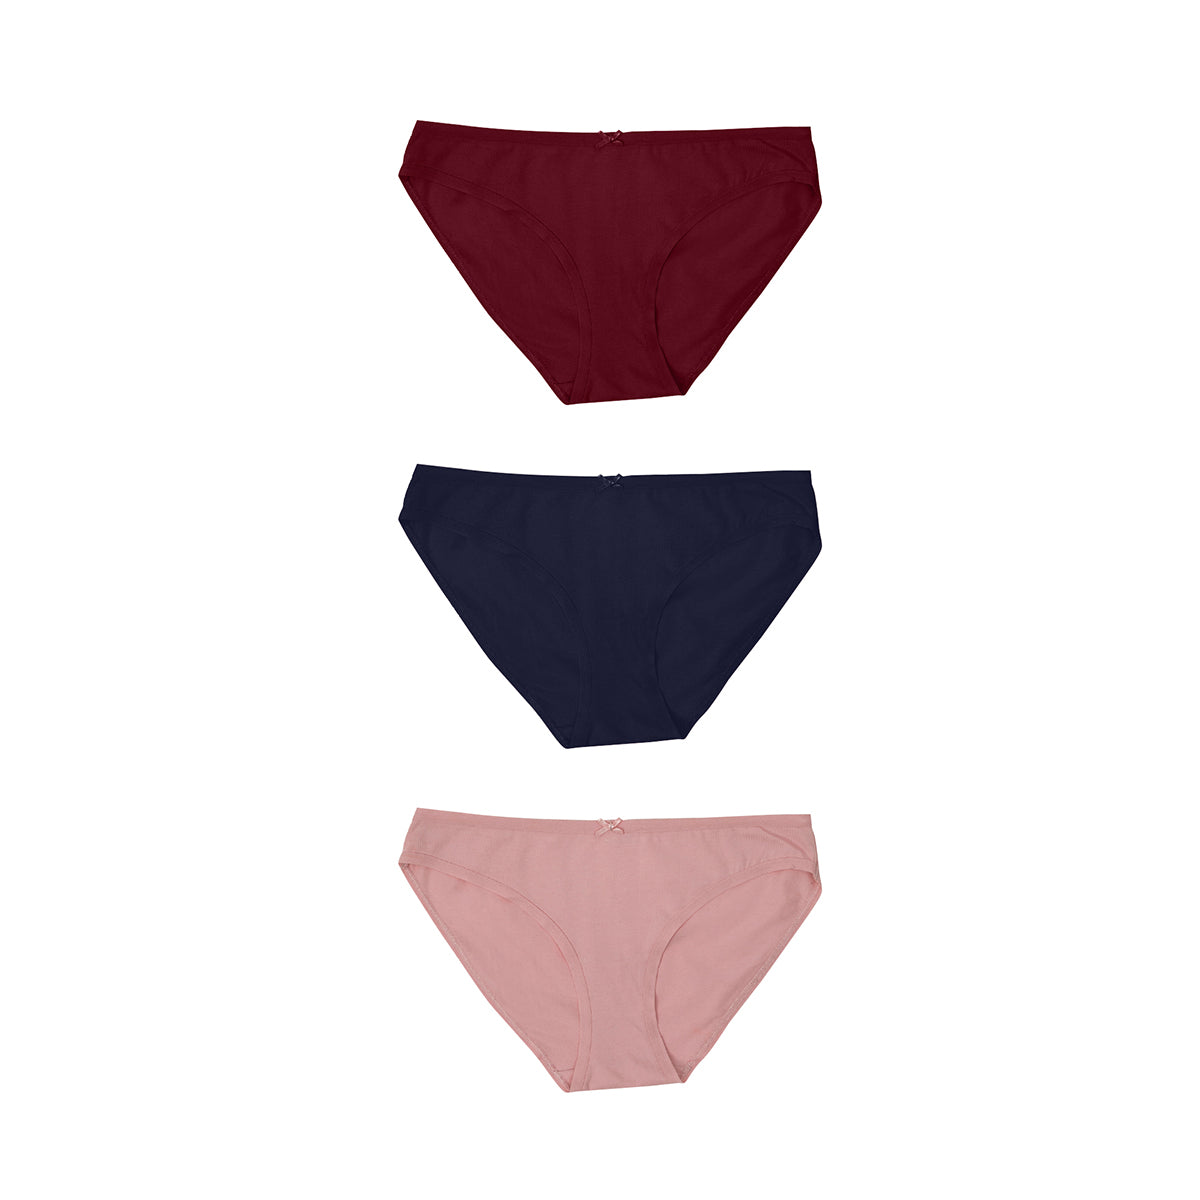 Pack of 3 Soft stretch cotton Low rise Bikini with full rear coverage-NYP170